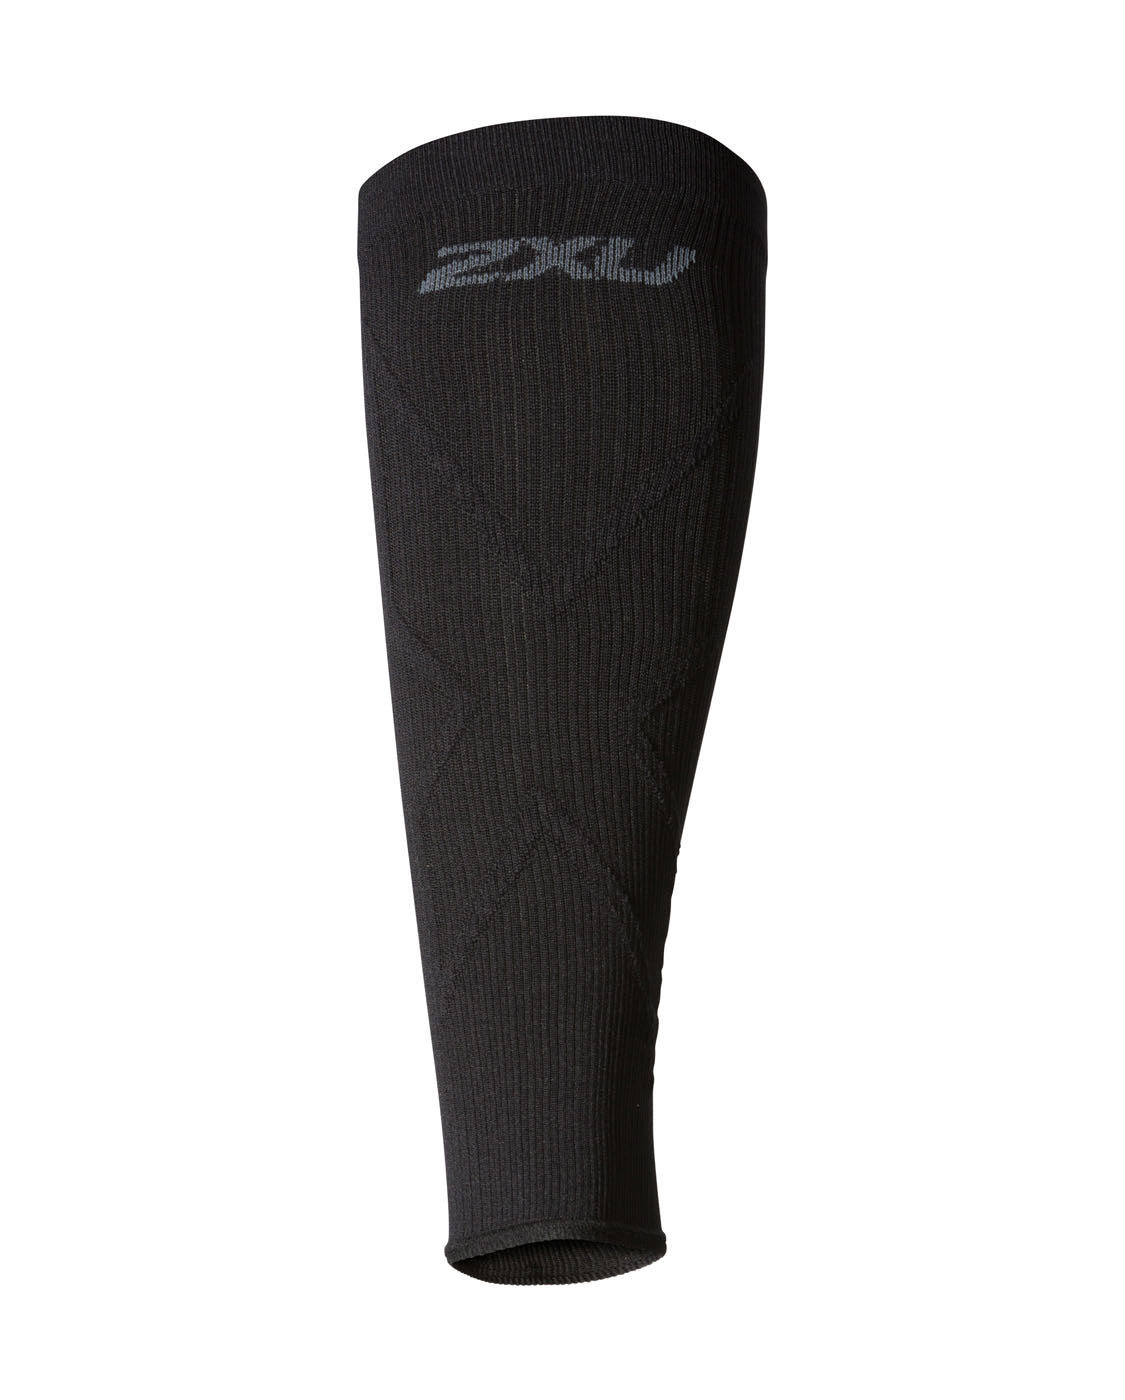 Buy 2XU Unisex Compression Flex Leg Sleeves online from GRIT+TONIC